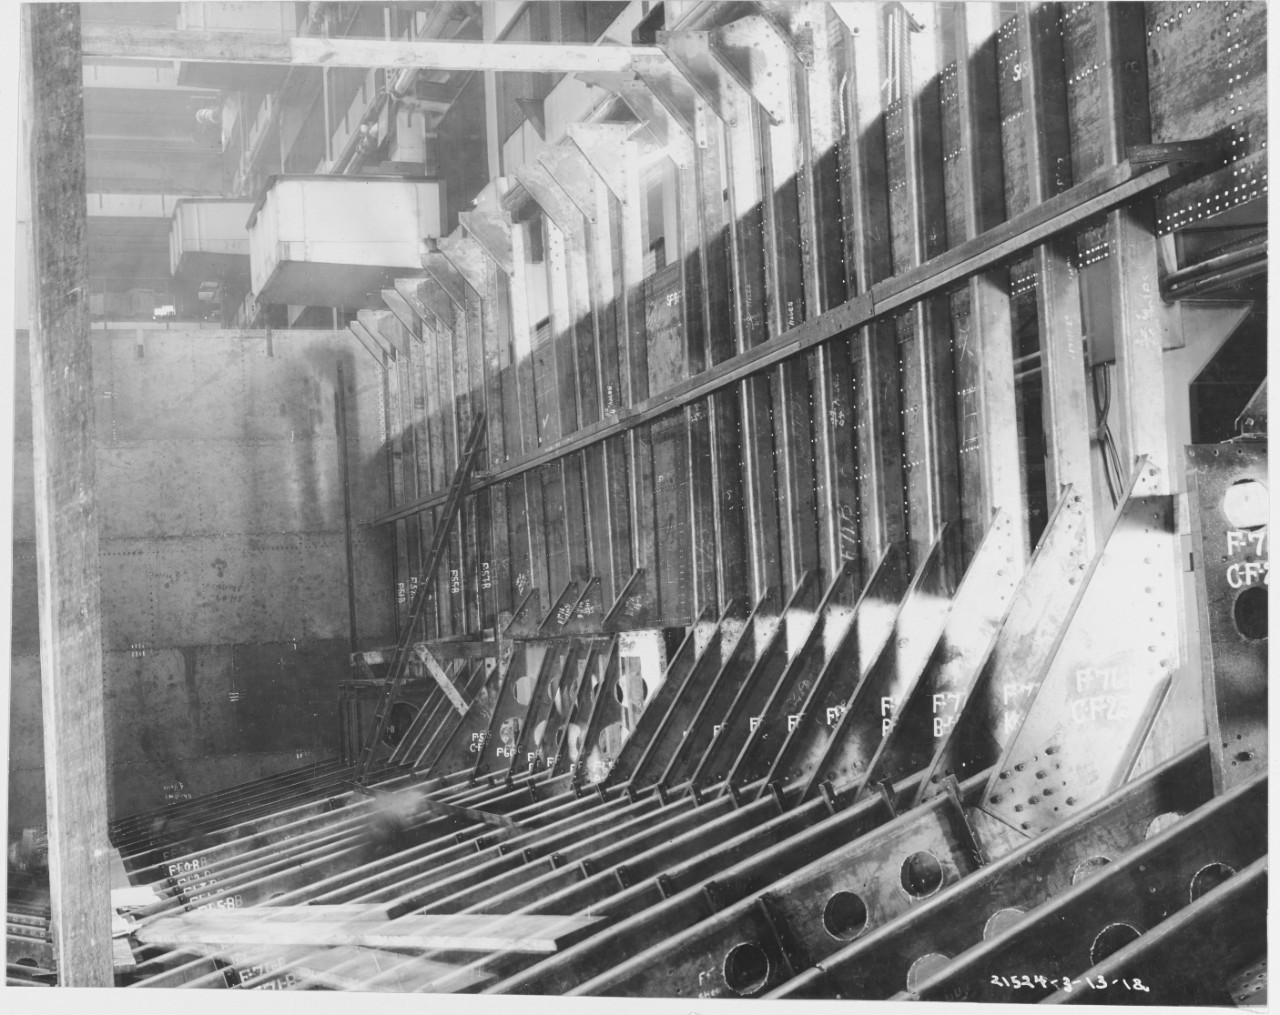 Construction of Ford Eagle Boats, Ford Motor Company, March 13, 1918